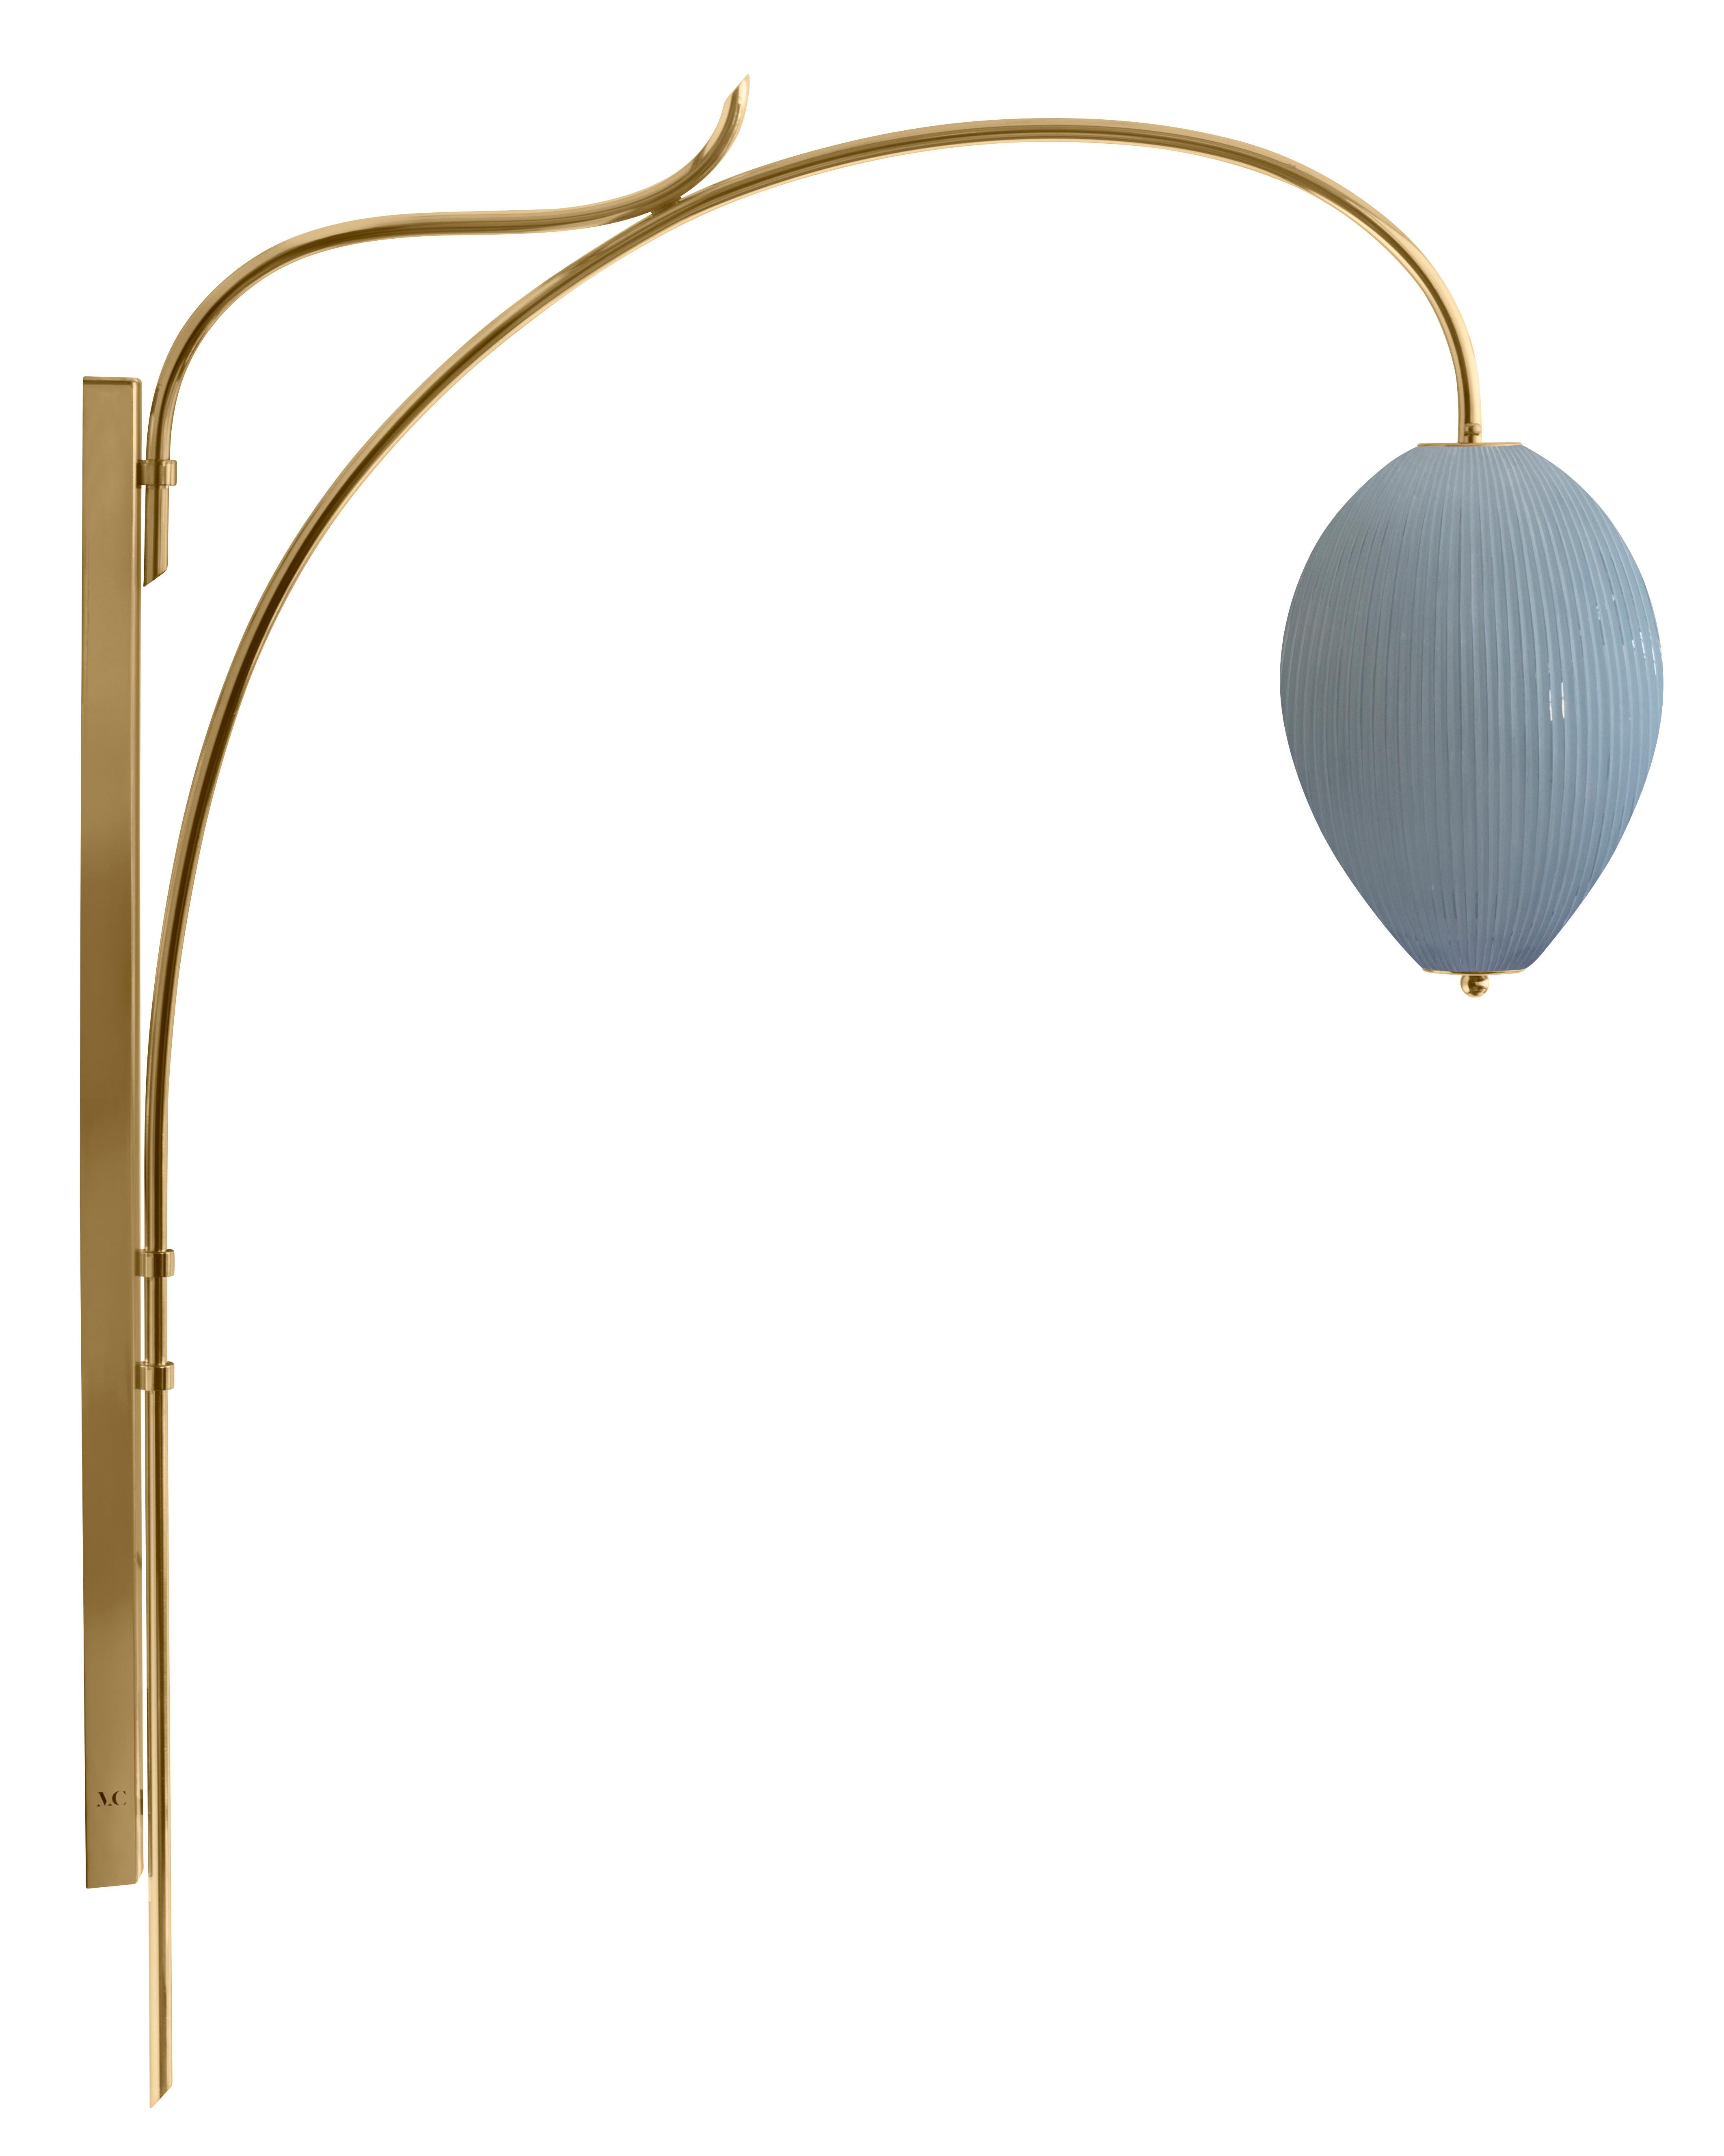 Wall lamp China 10 by Magic Circus Editions.
Dimensions: H 134 x W 25.2 x D 113.5 cm
Materials: brass, mouth blown glass sculpted with a diamond saw.
Colour: opal grey.

Available finishes: brass, nickel.
Available colours: enamel soft white,